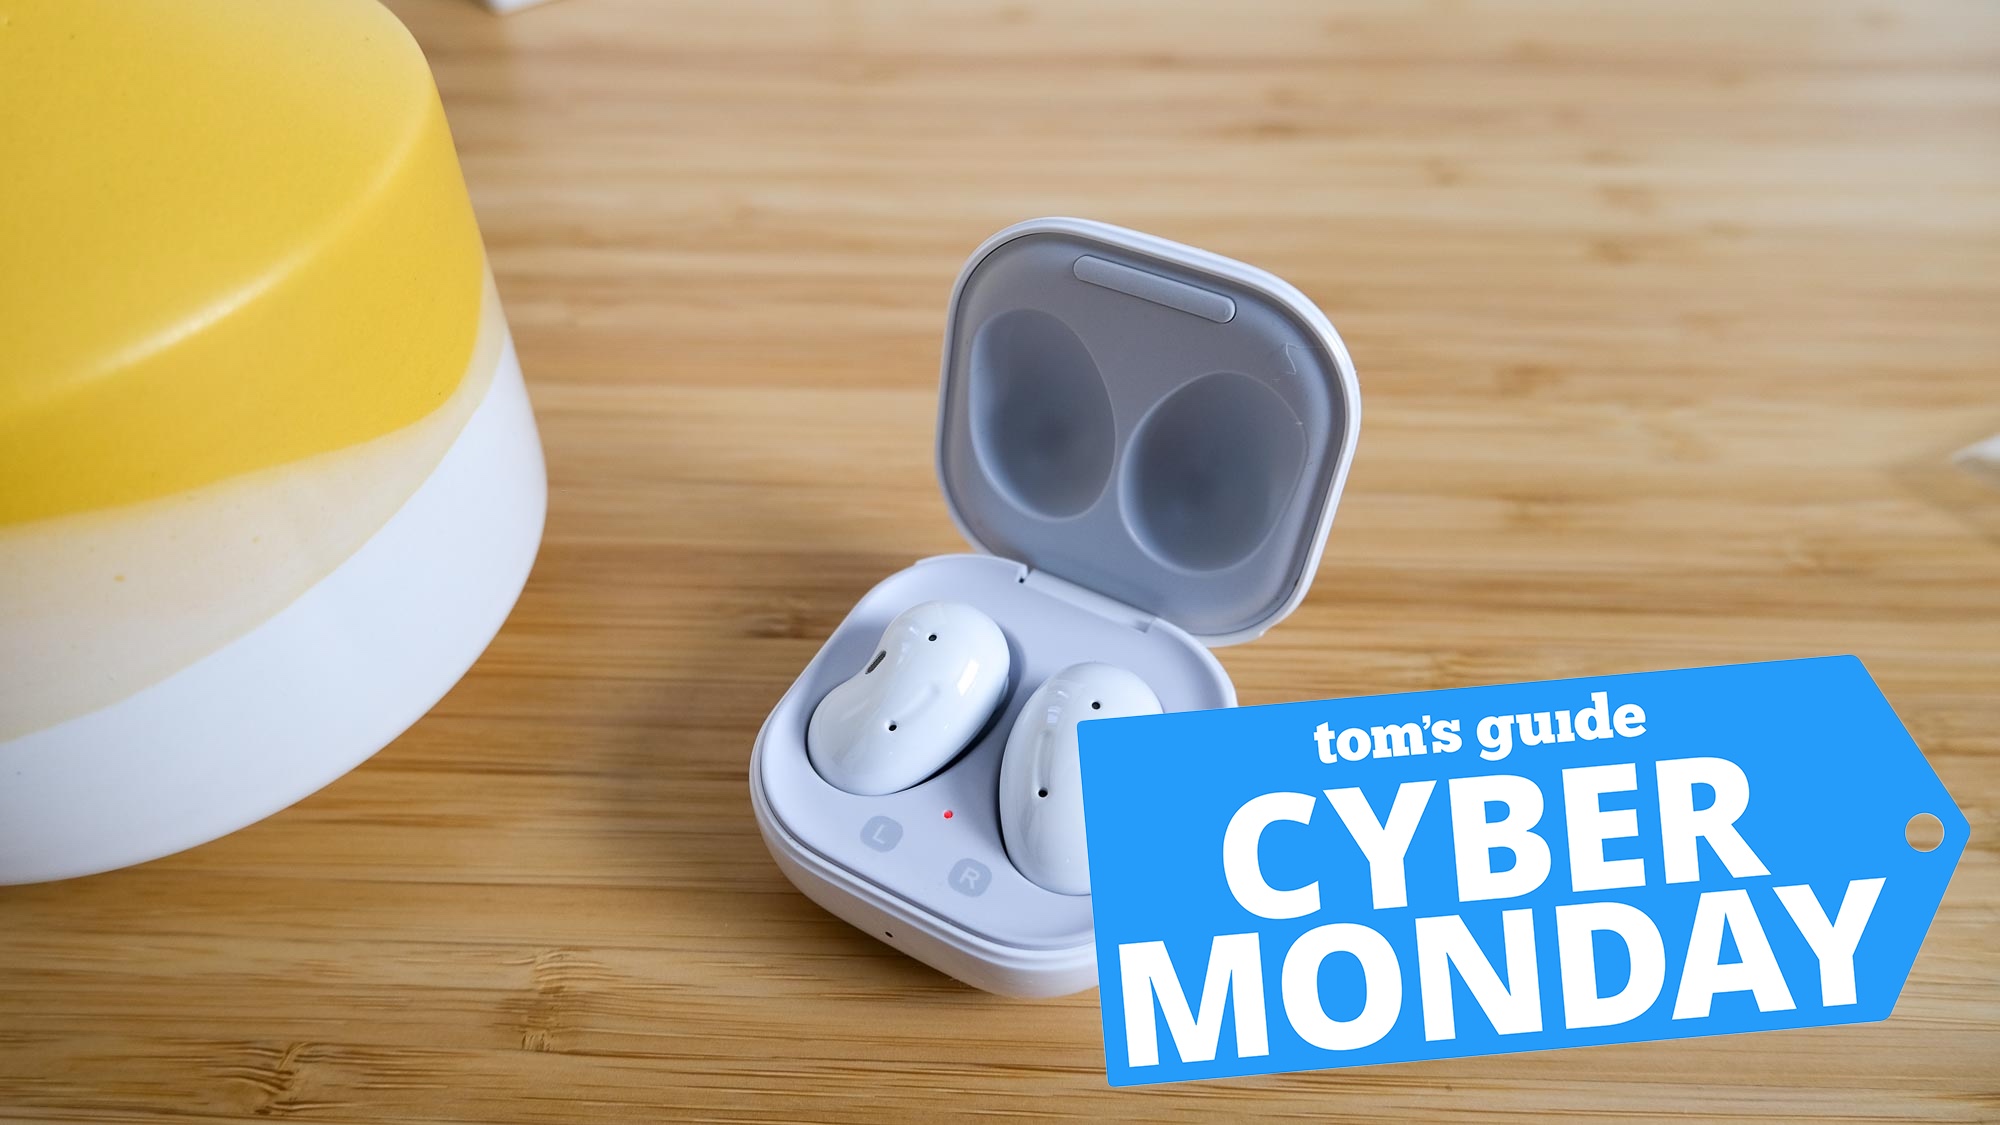 Galaxy Buds live cyber monday deal